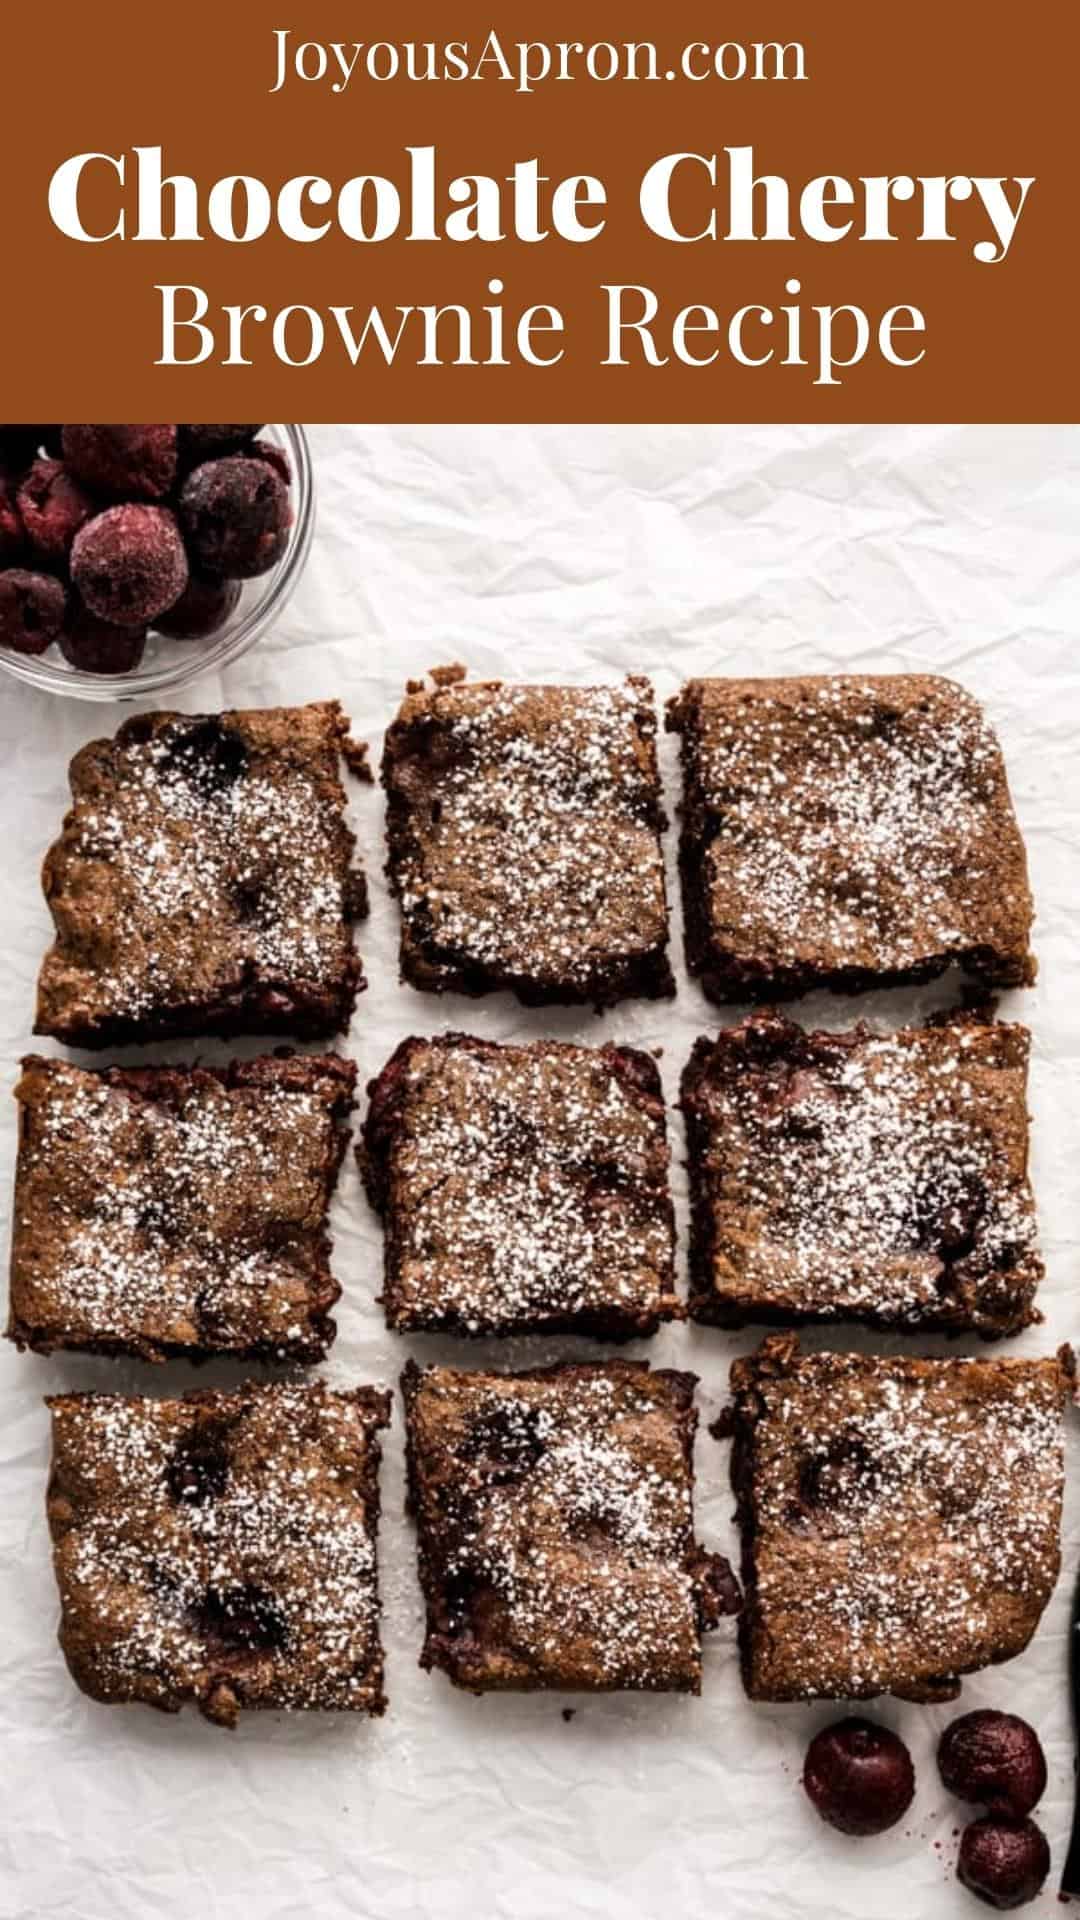 Chocolate Cherry Brownies - Fudge-y, rich and gooey chocolate brownies filled with juicy cherries, sprinkled with powdered sugar. A fun and festive dessert recipe! via @joyousapron